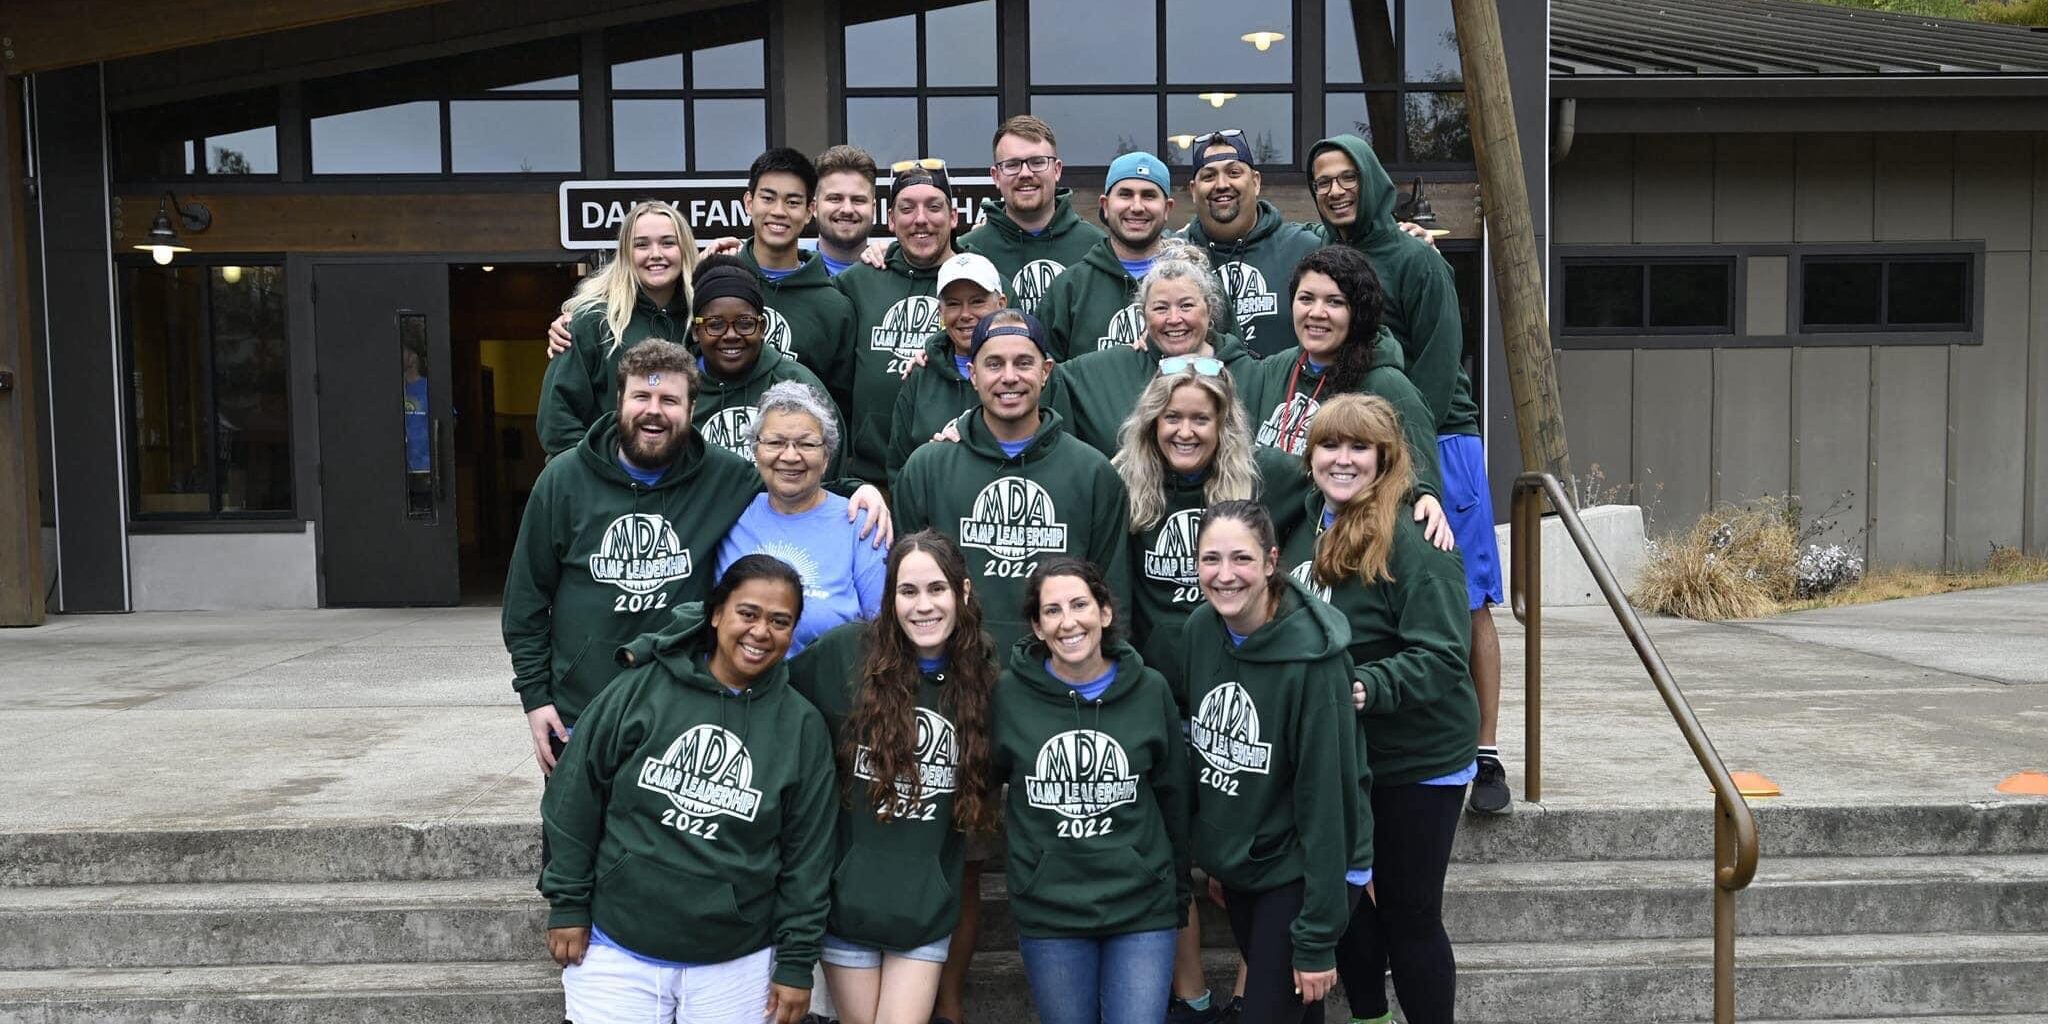 Large group of MDA staff and volunteers wearing matching green sweatshirts stand on a set of outdoor steps